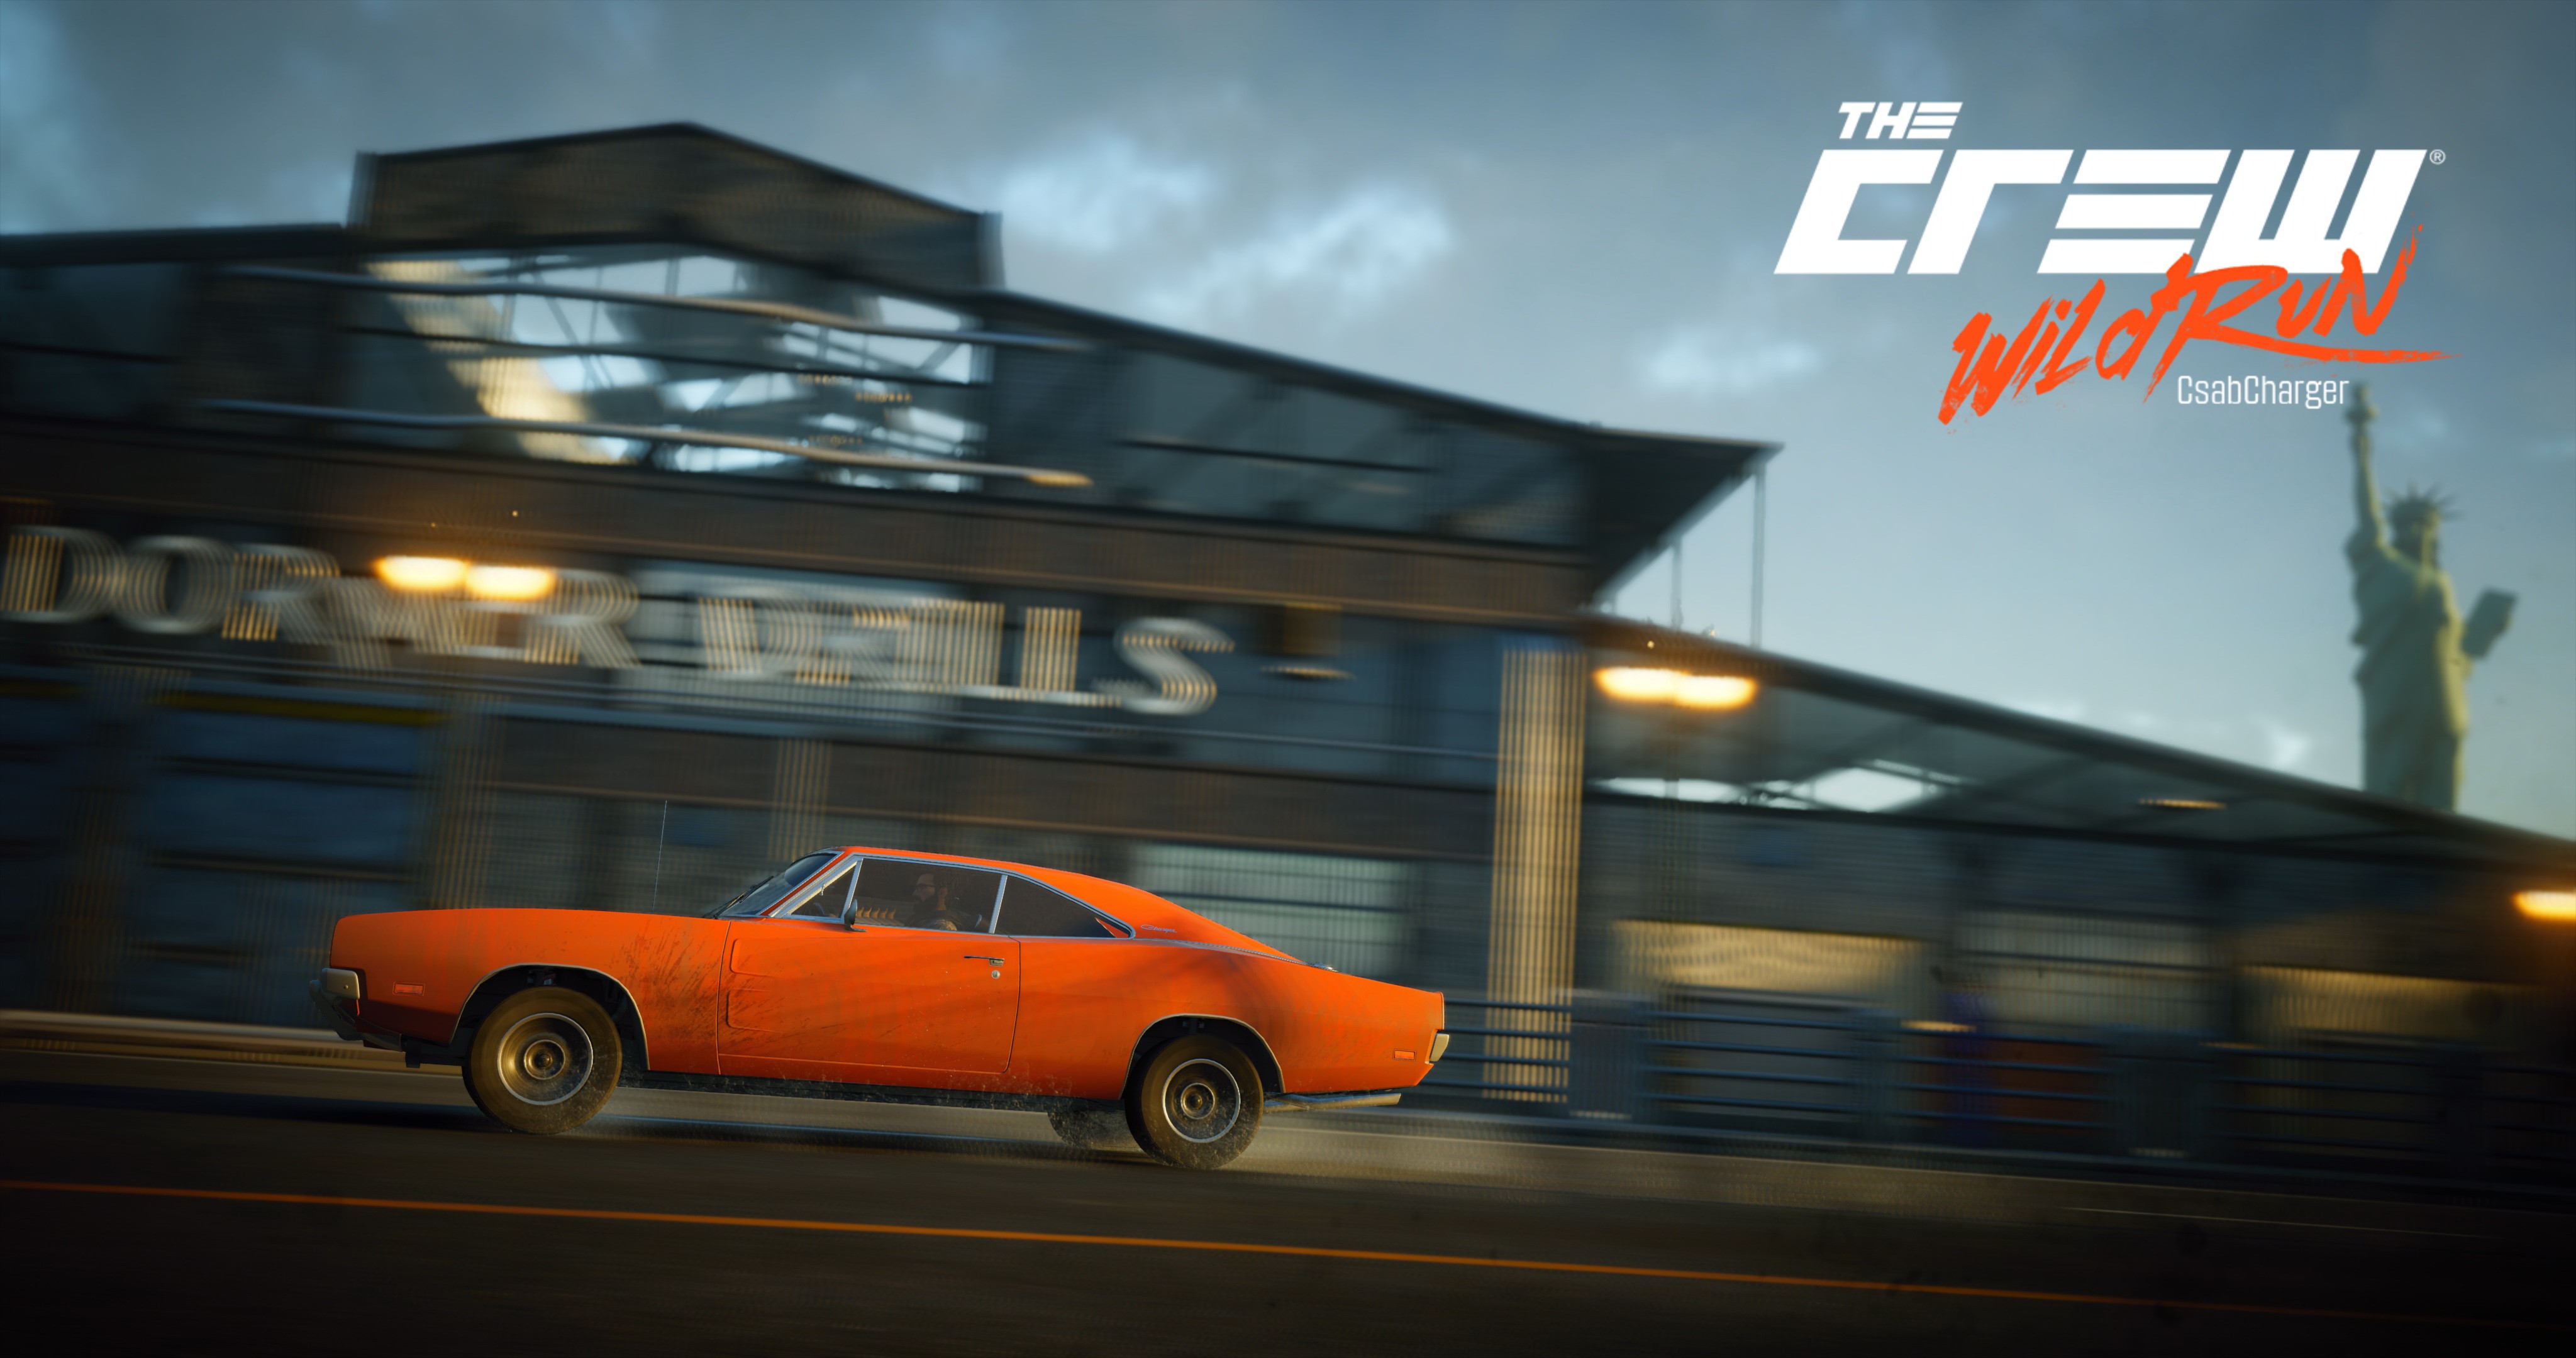 General 4096x2160 The Crew The Crew Wild Run sunset Dodge Charger video games car